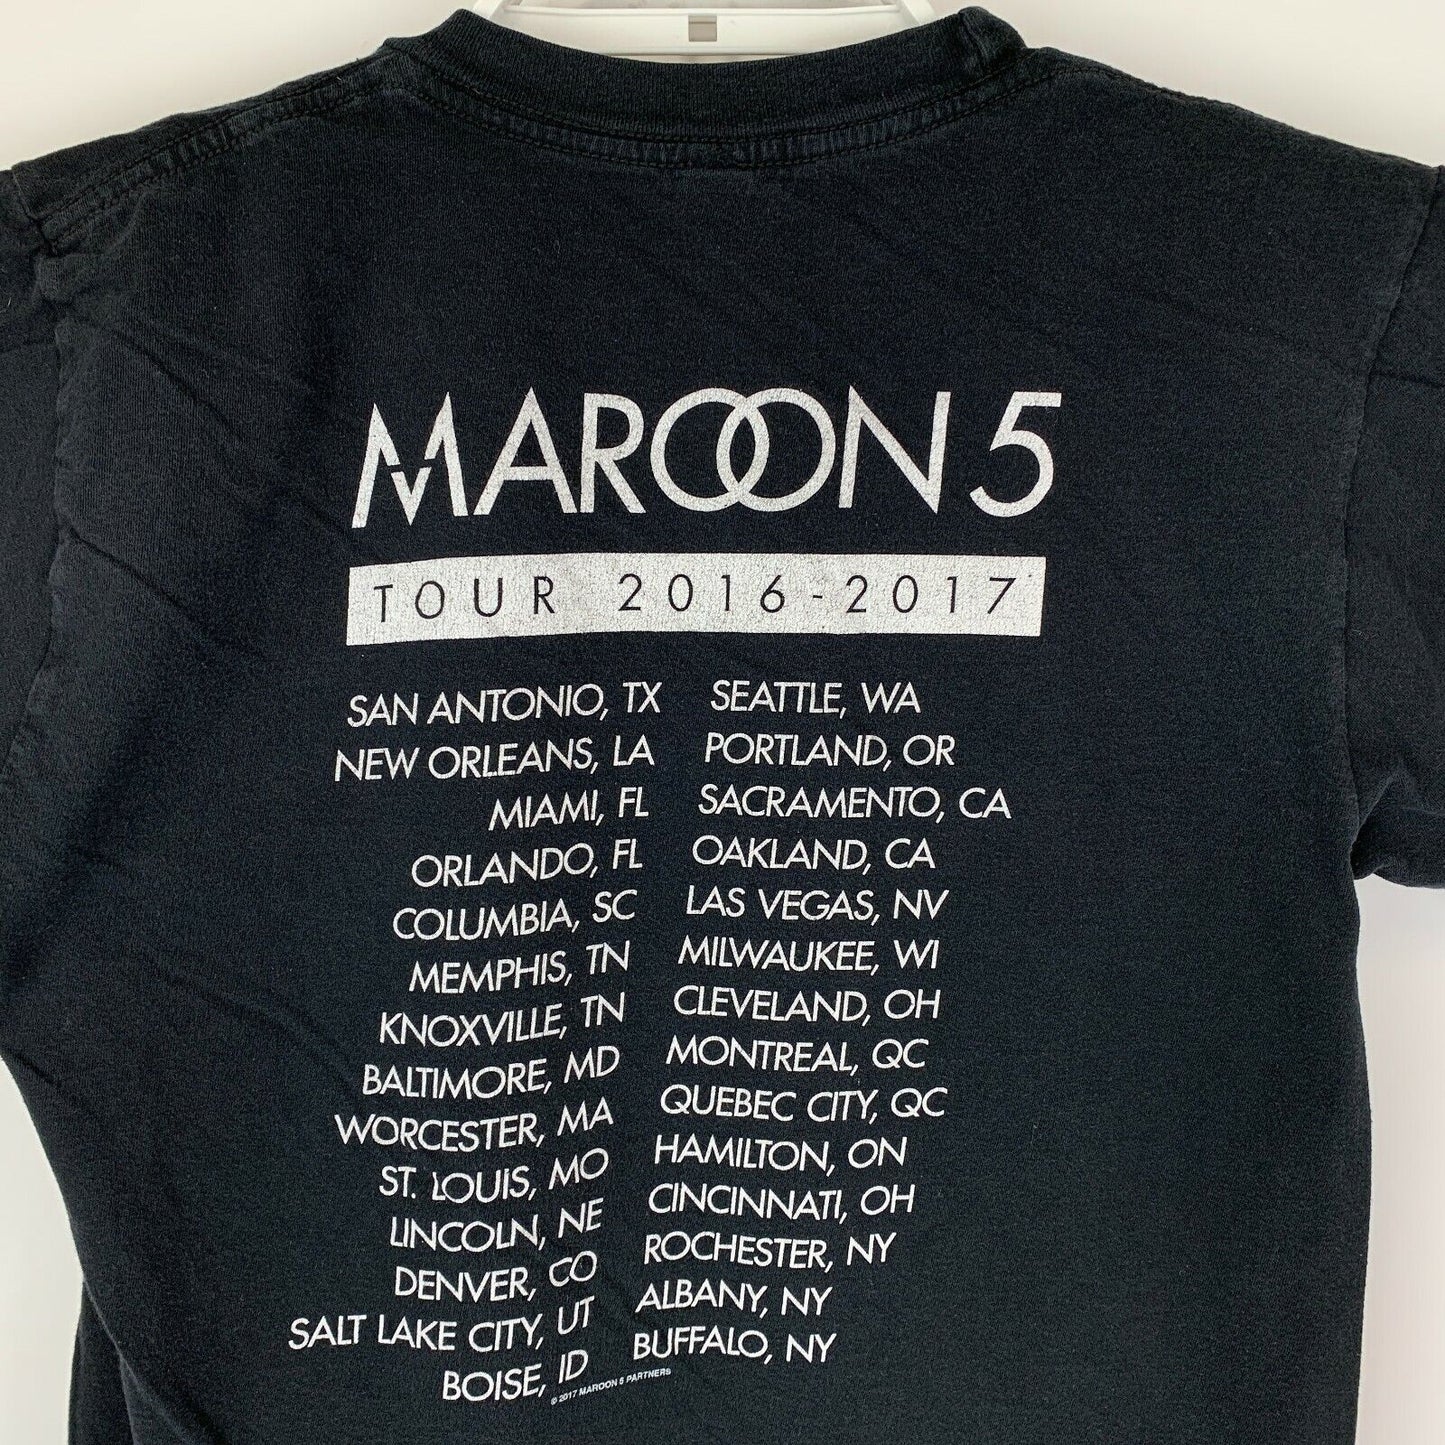 2016-2017 Maroon 5 Tour T Shirt Pop Rock Band Concert Black Graphic Tee Small